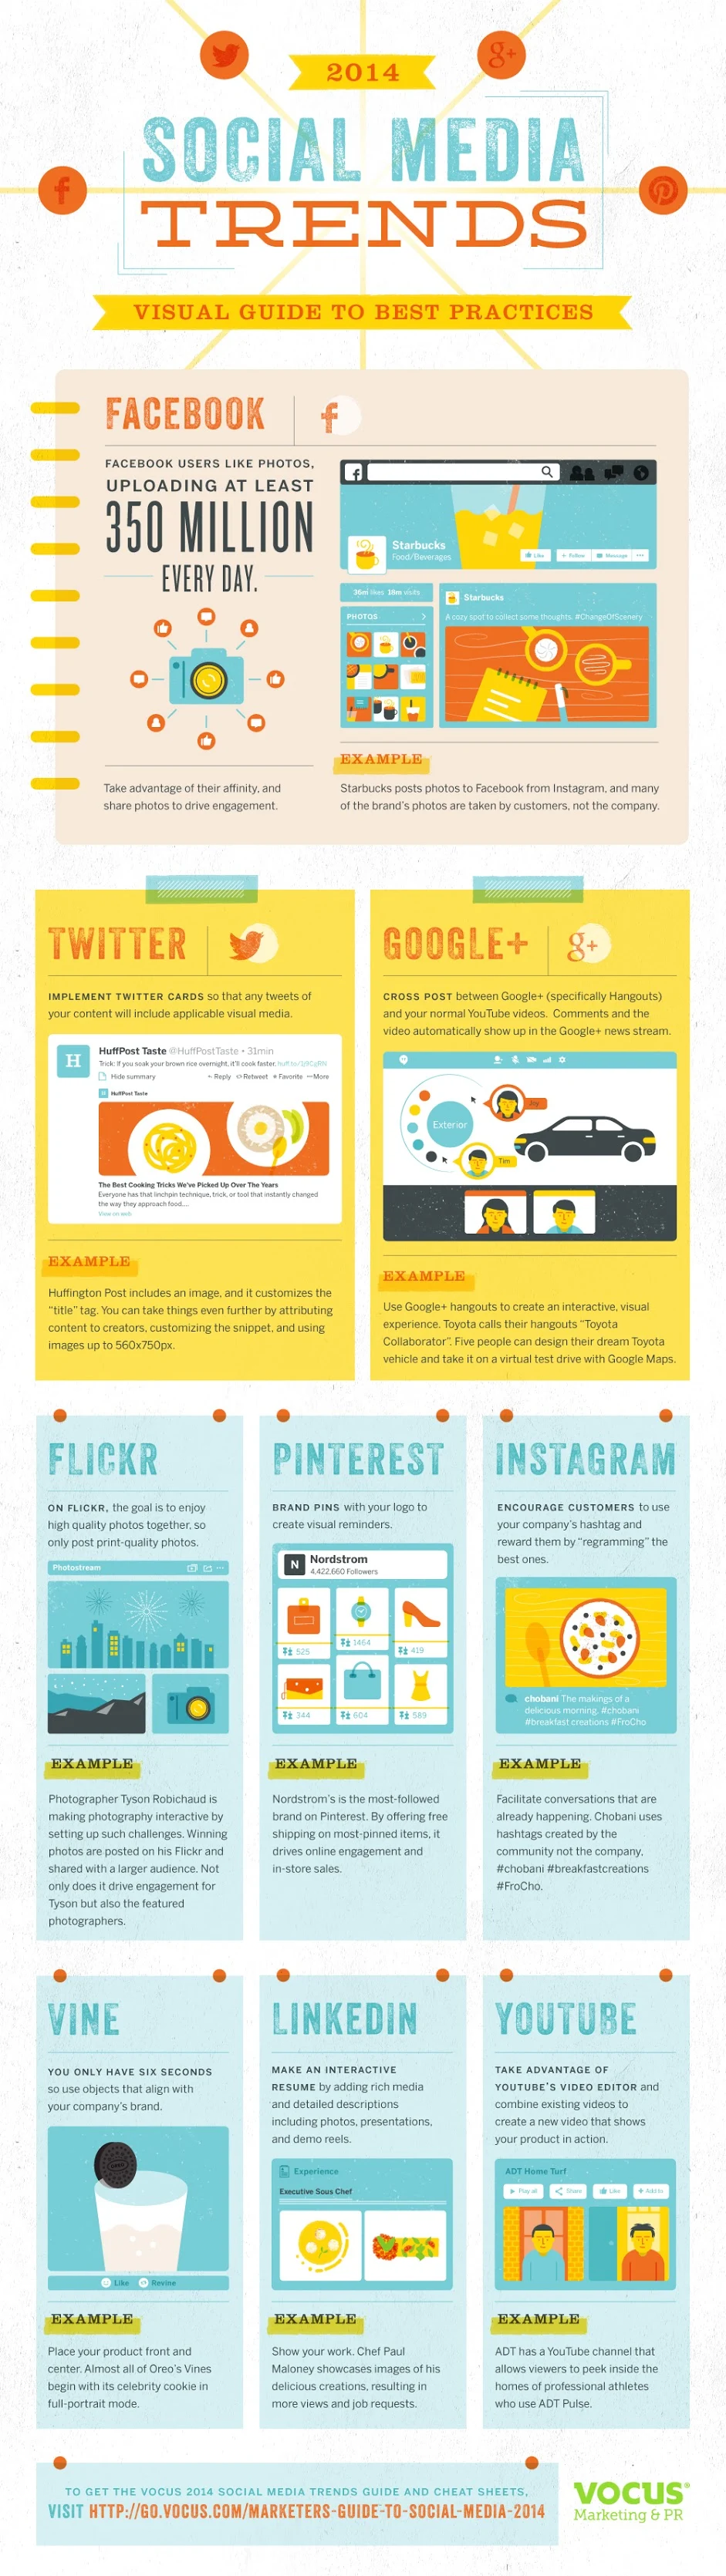 #SocialMedia Marketing Trends And Best Practices 2014 For Business - #infographic